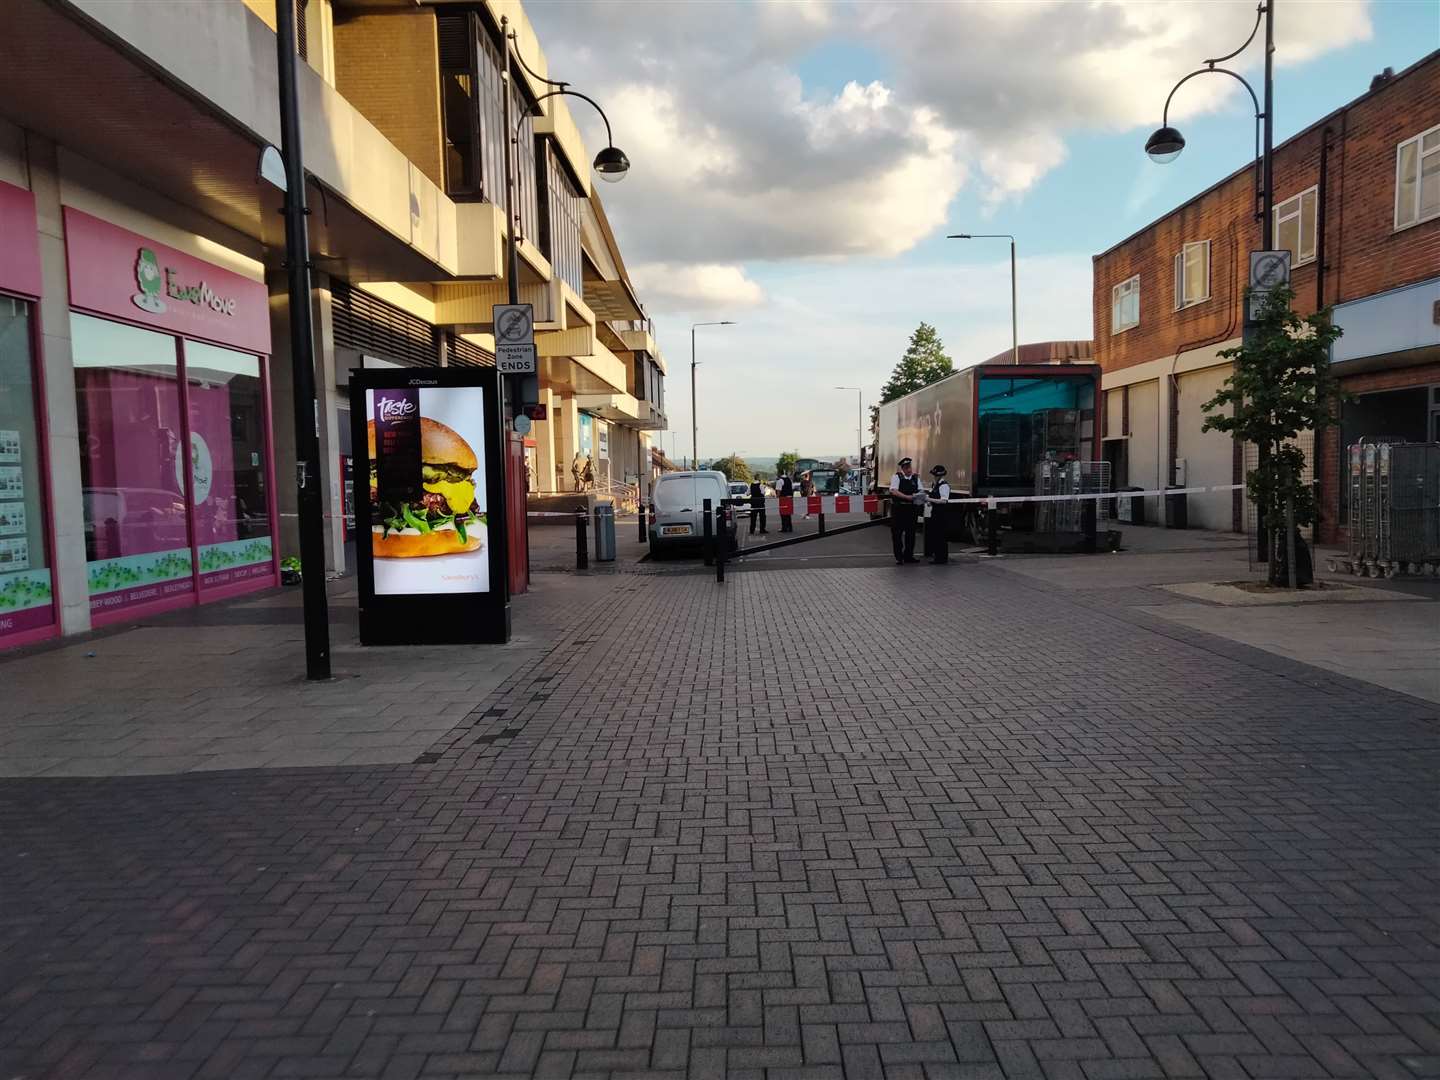 Police cordon off a stretch of road in Bexleyheath after a man was seen with slash wounds Picture: Sean Delaney